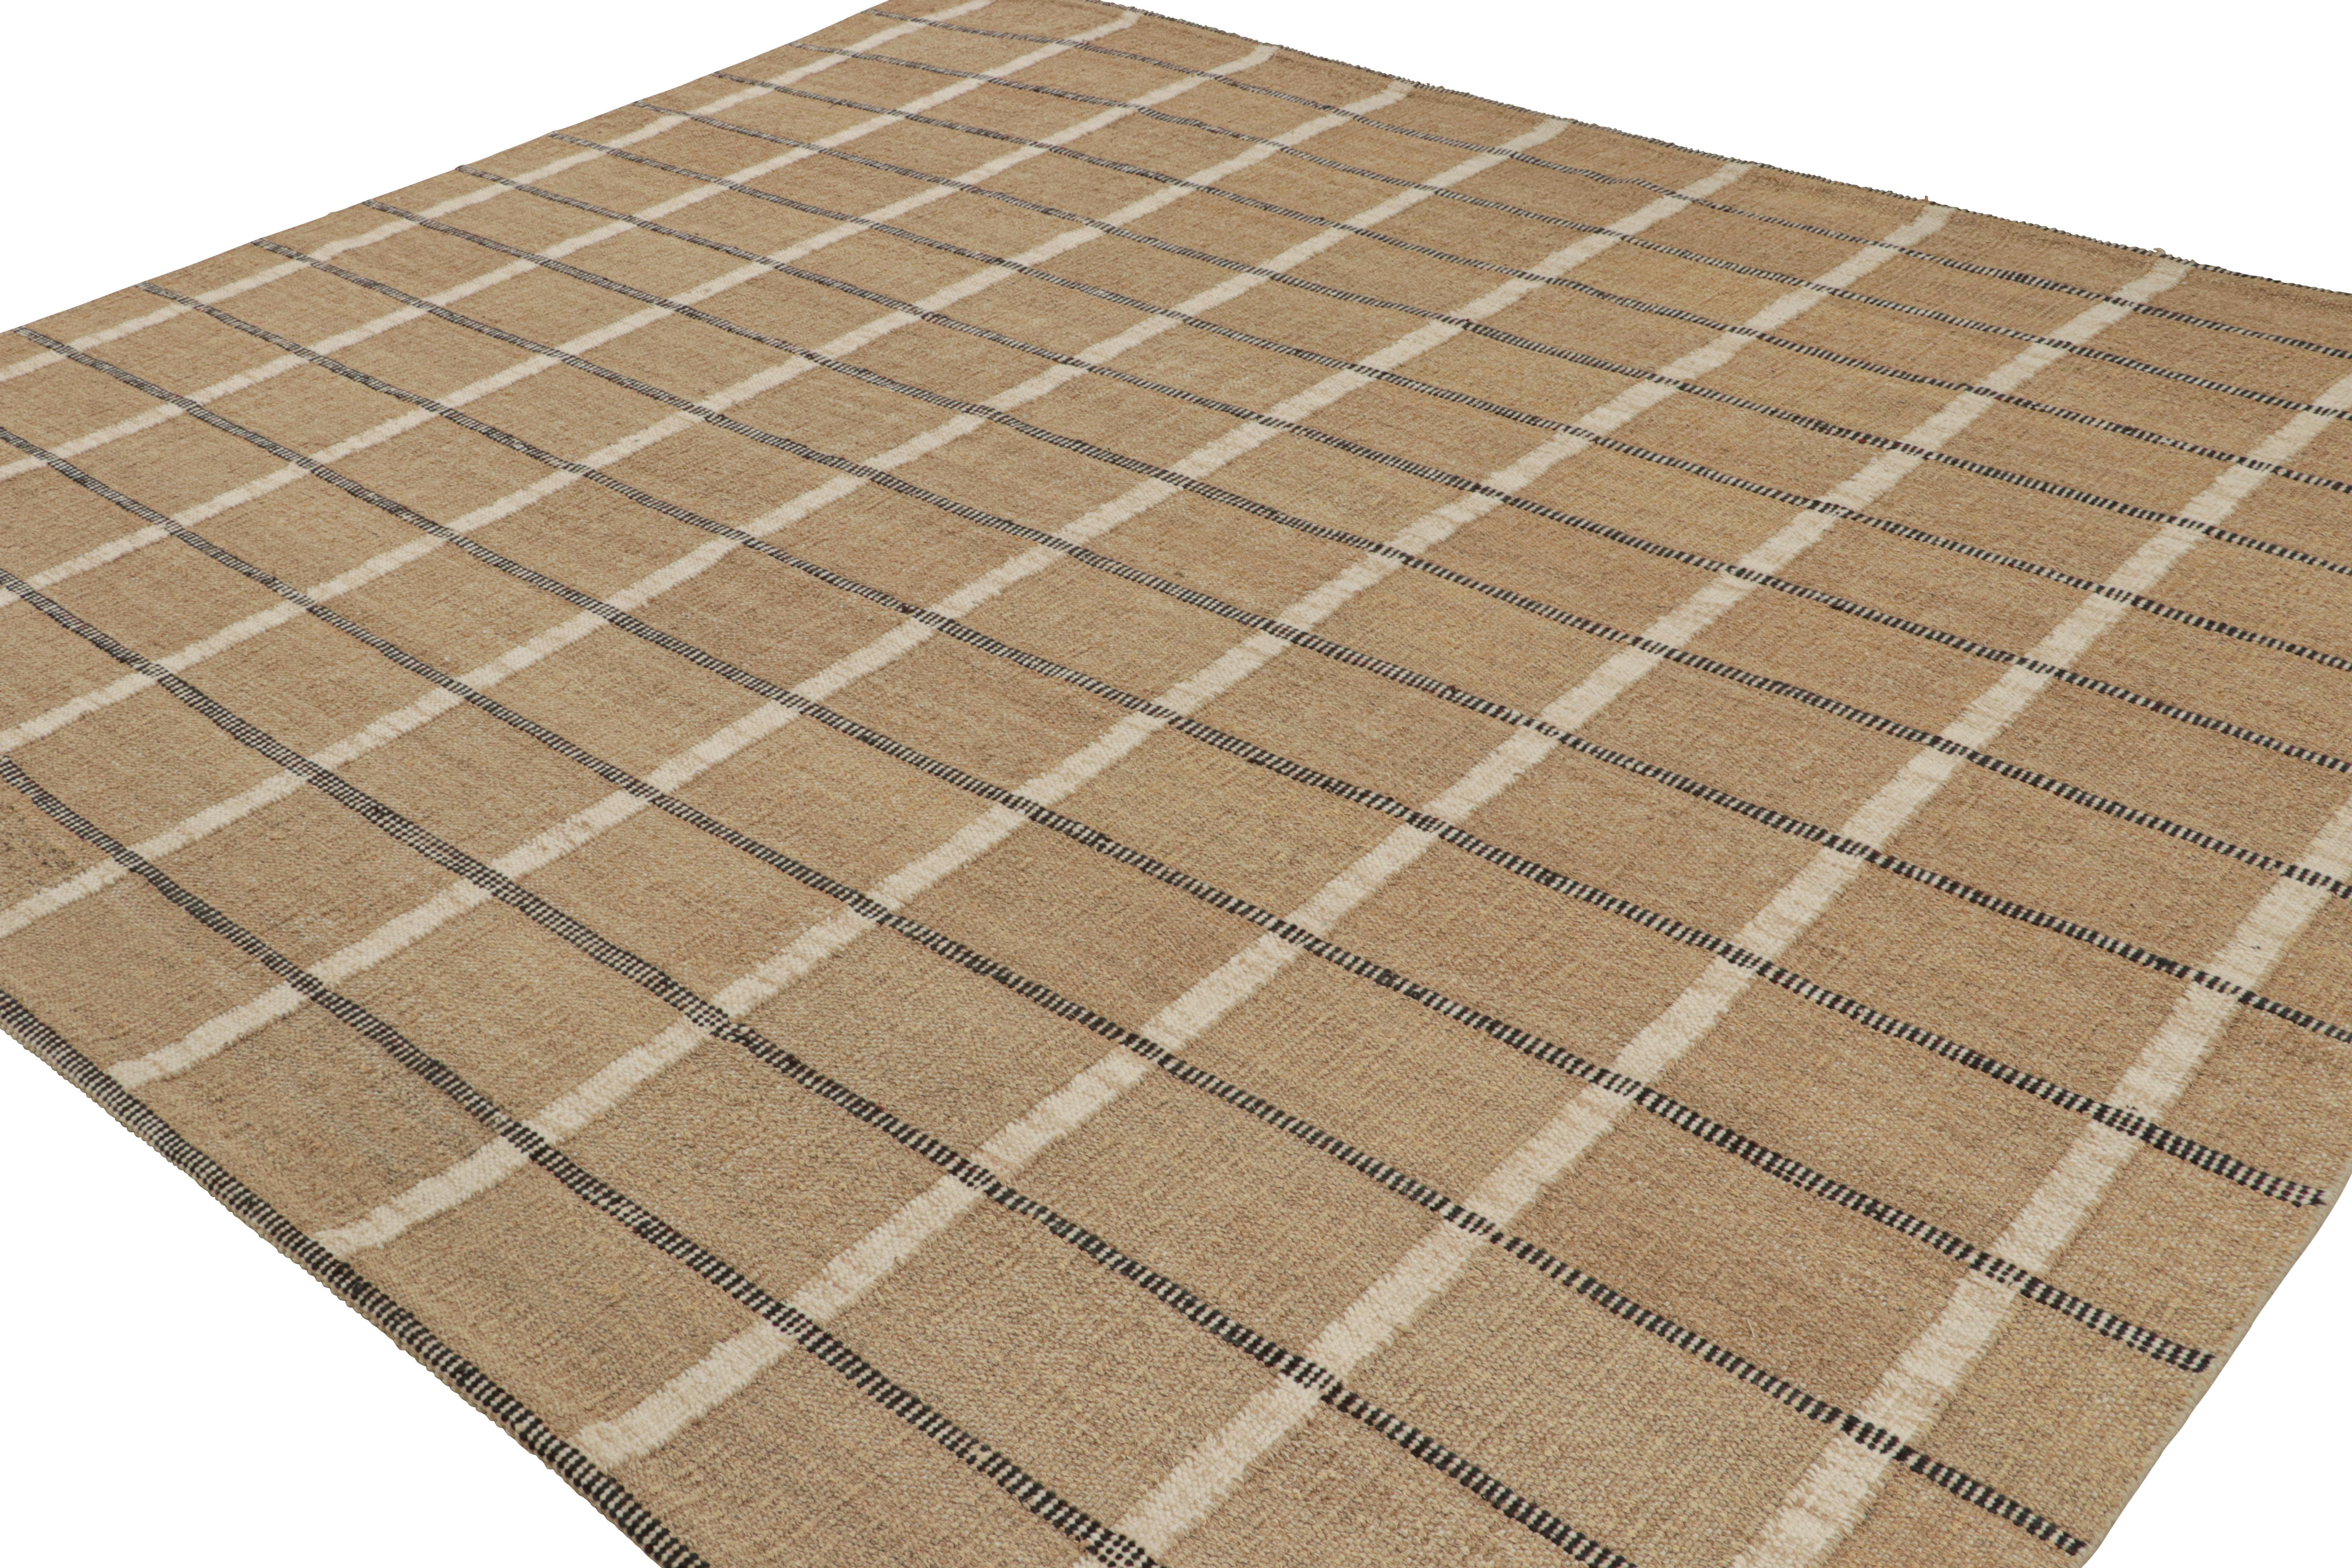 Handwoven in organic wool and hemp, this 12x10 Scandinavian Swedish Deco style kilim rug, features a simple play of beige-brown with off-white and black stripes and textural look of blended yarns that our Scandinavian Kilims are known for.

On the